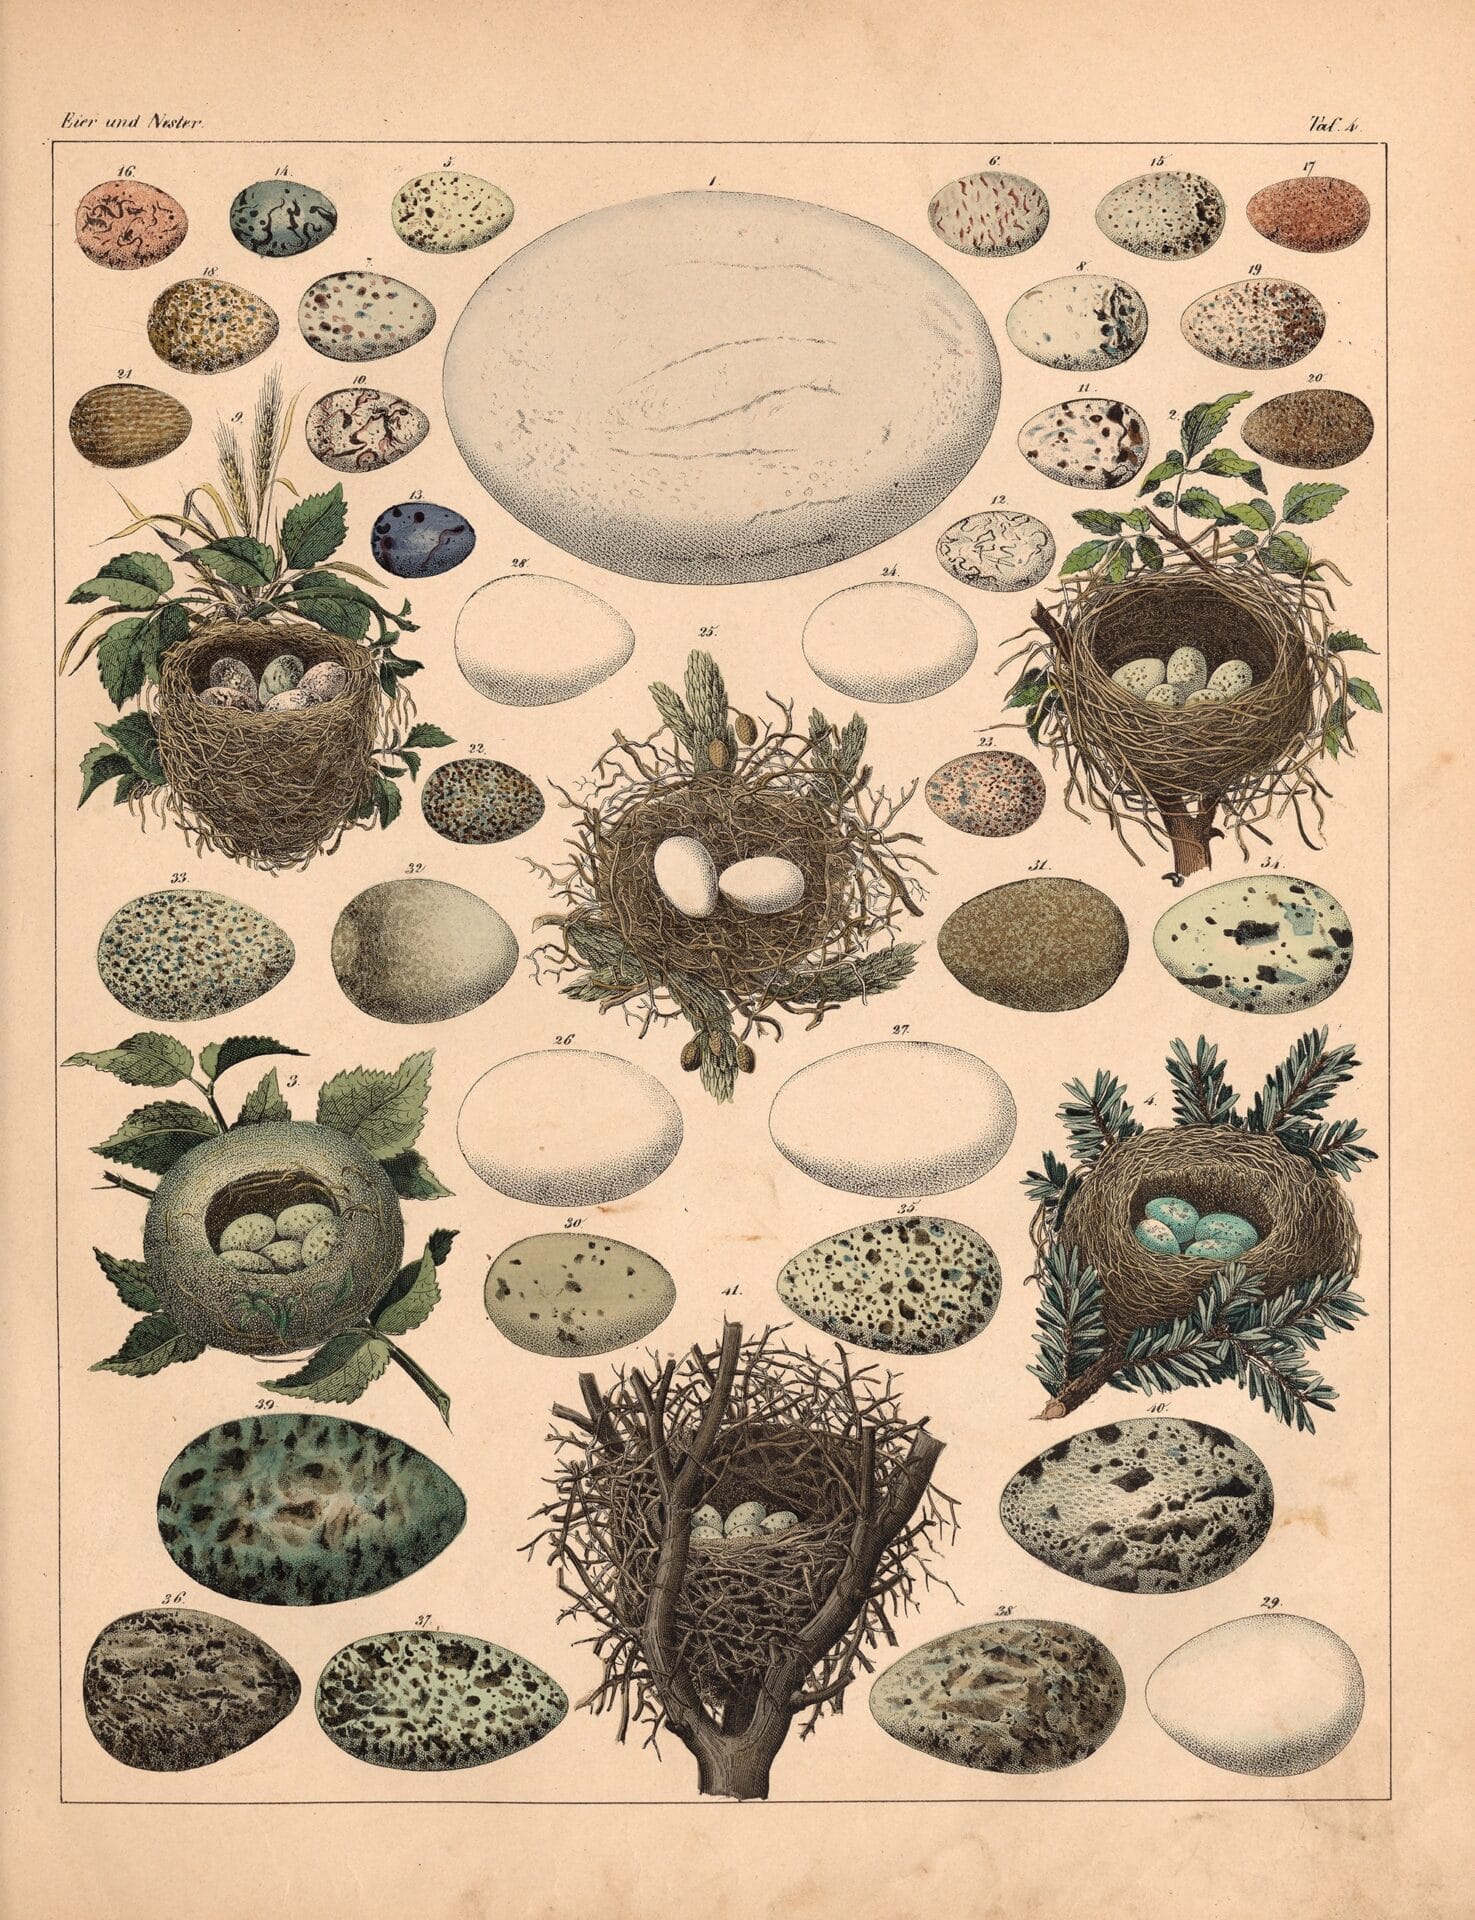 an 18th-century natural history book illustration of bird eggs and nests